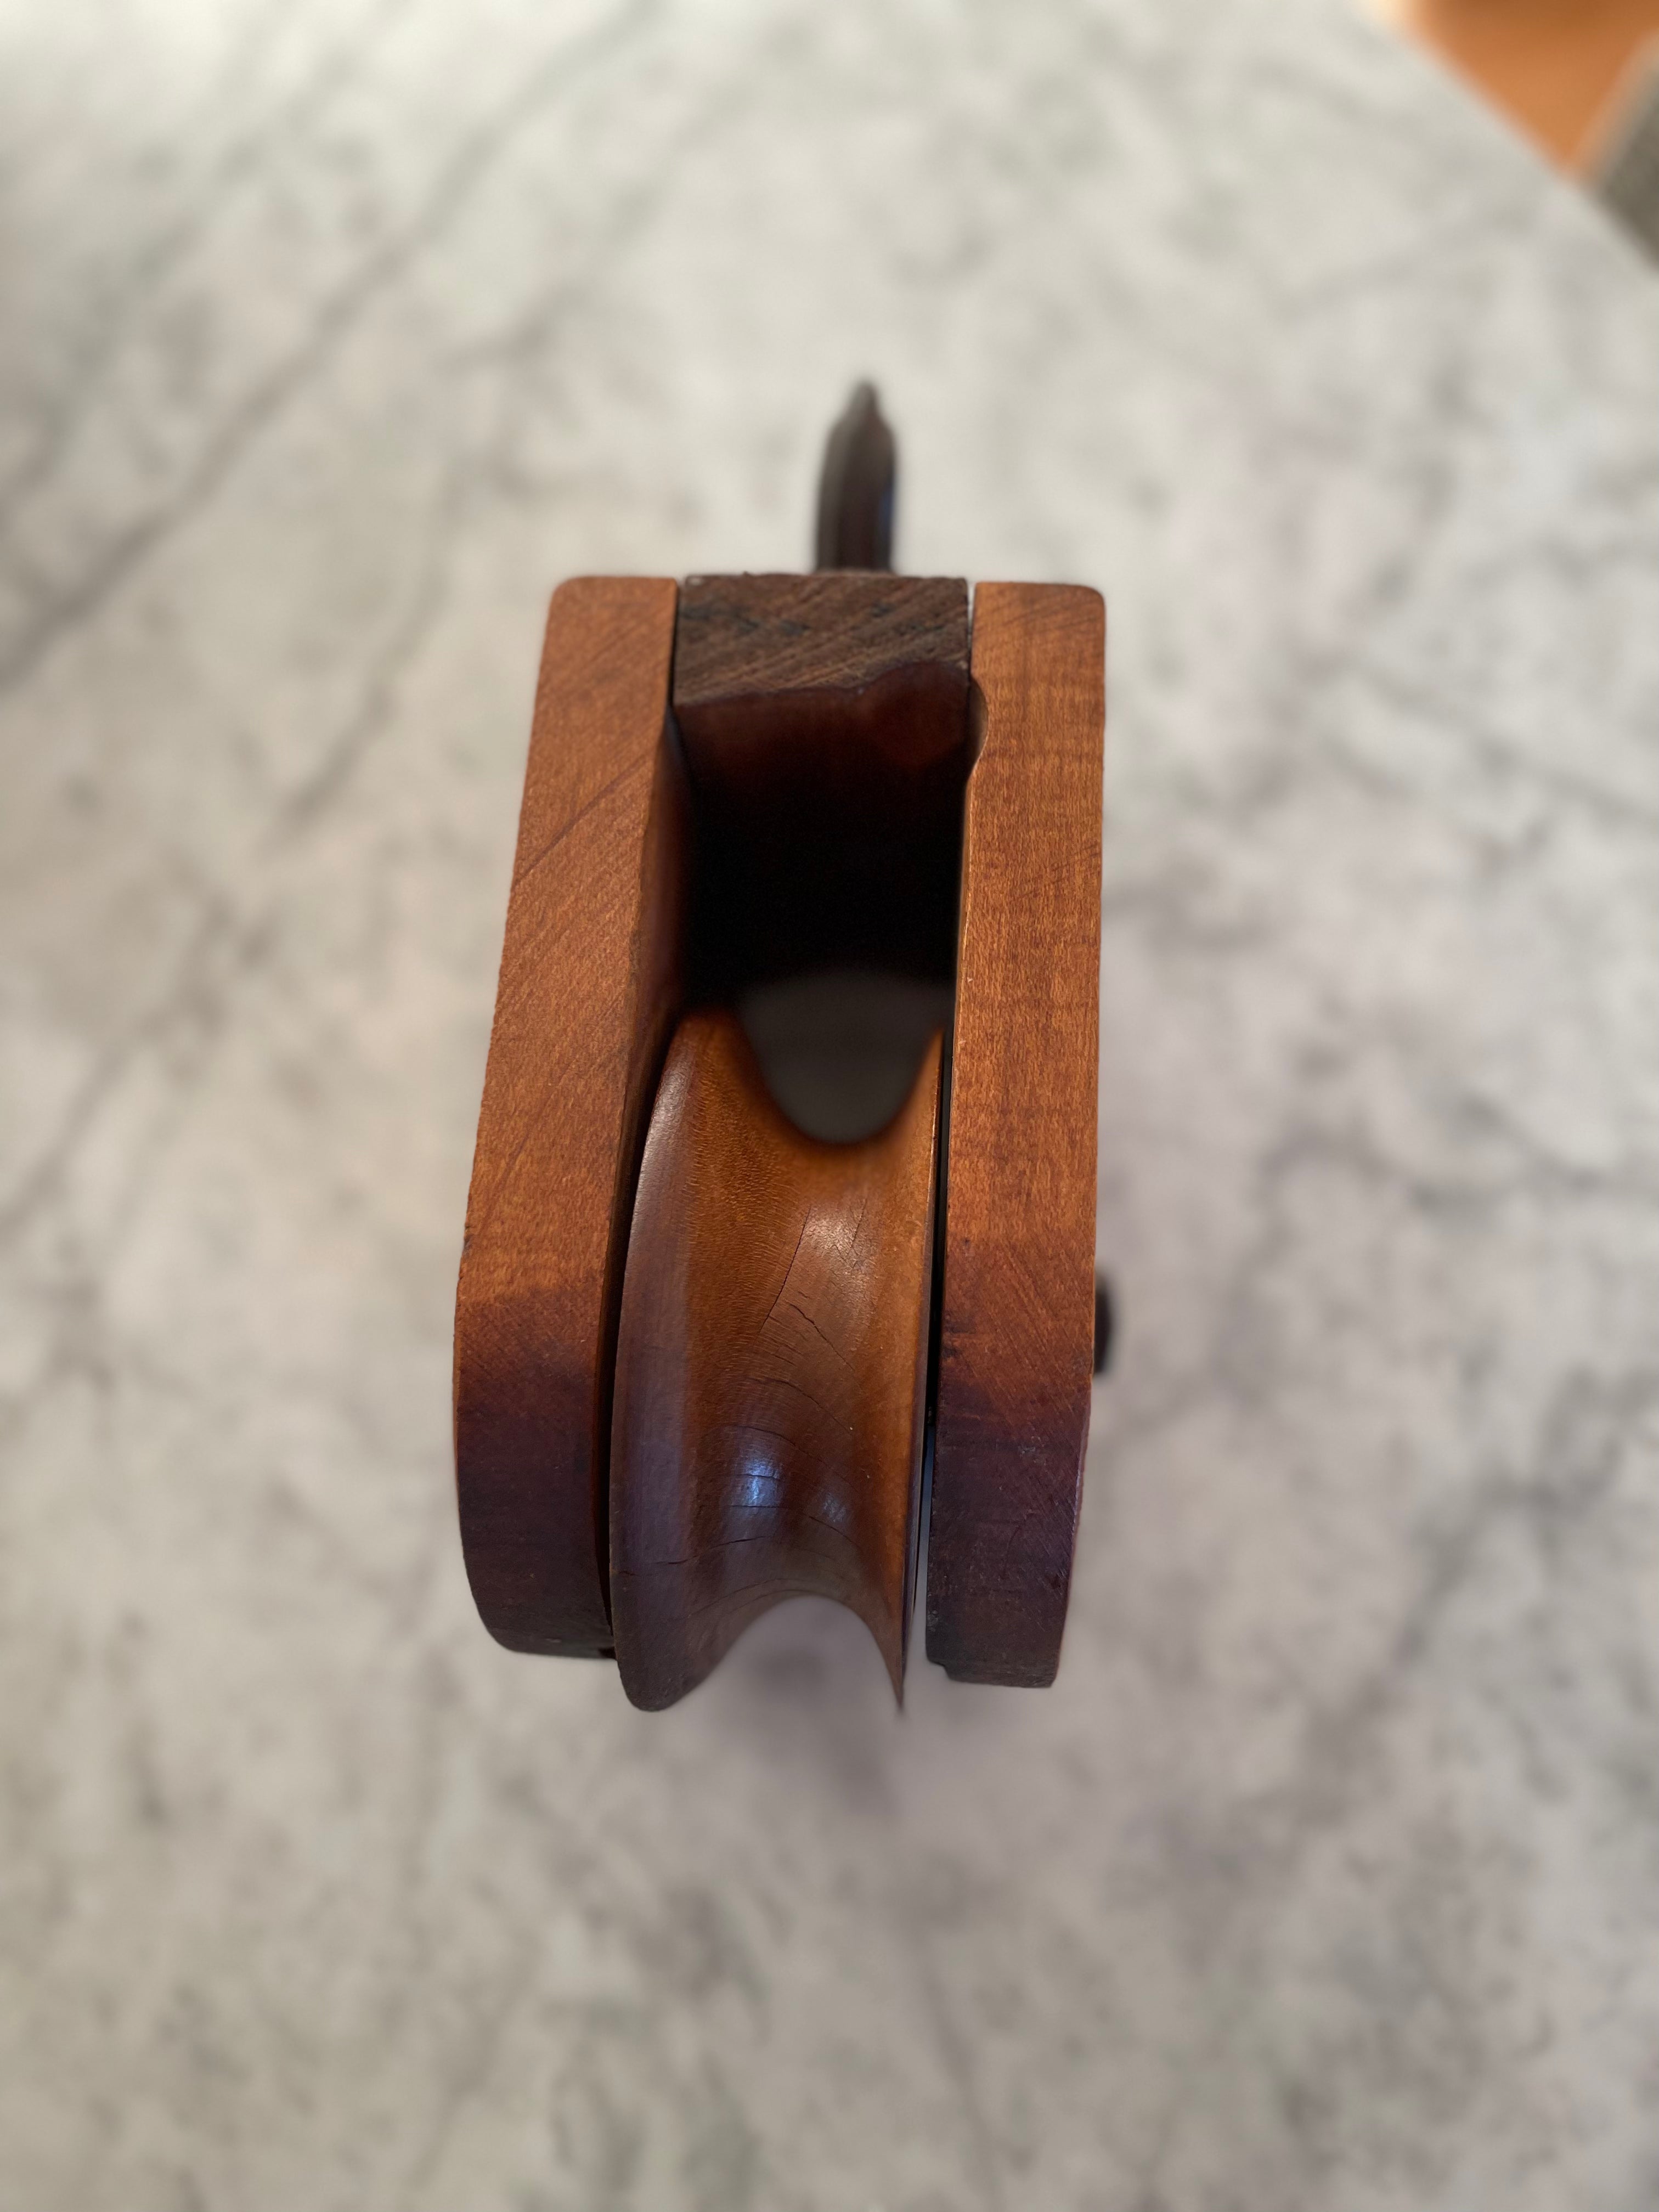 Wood Pulley